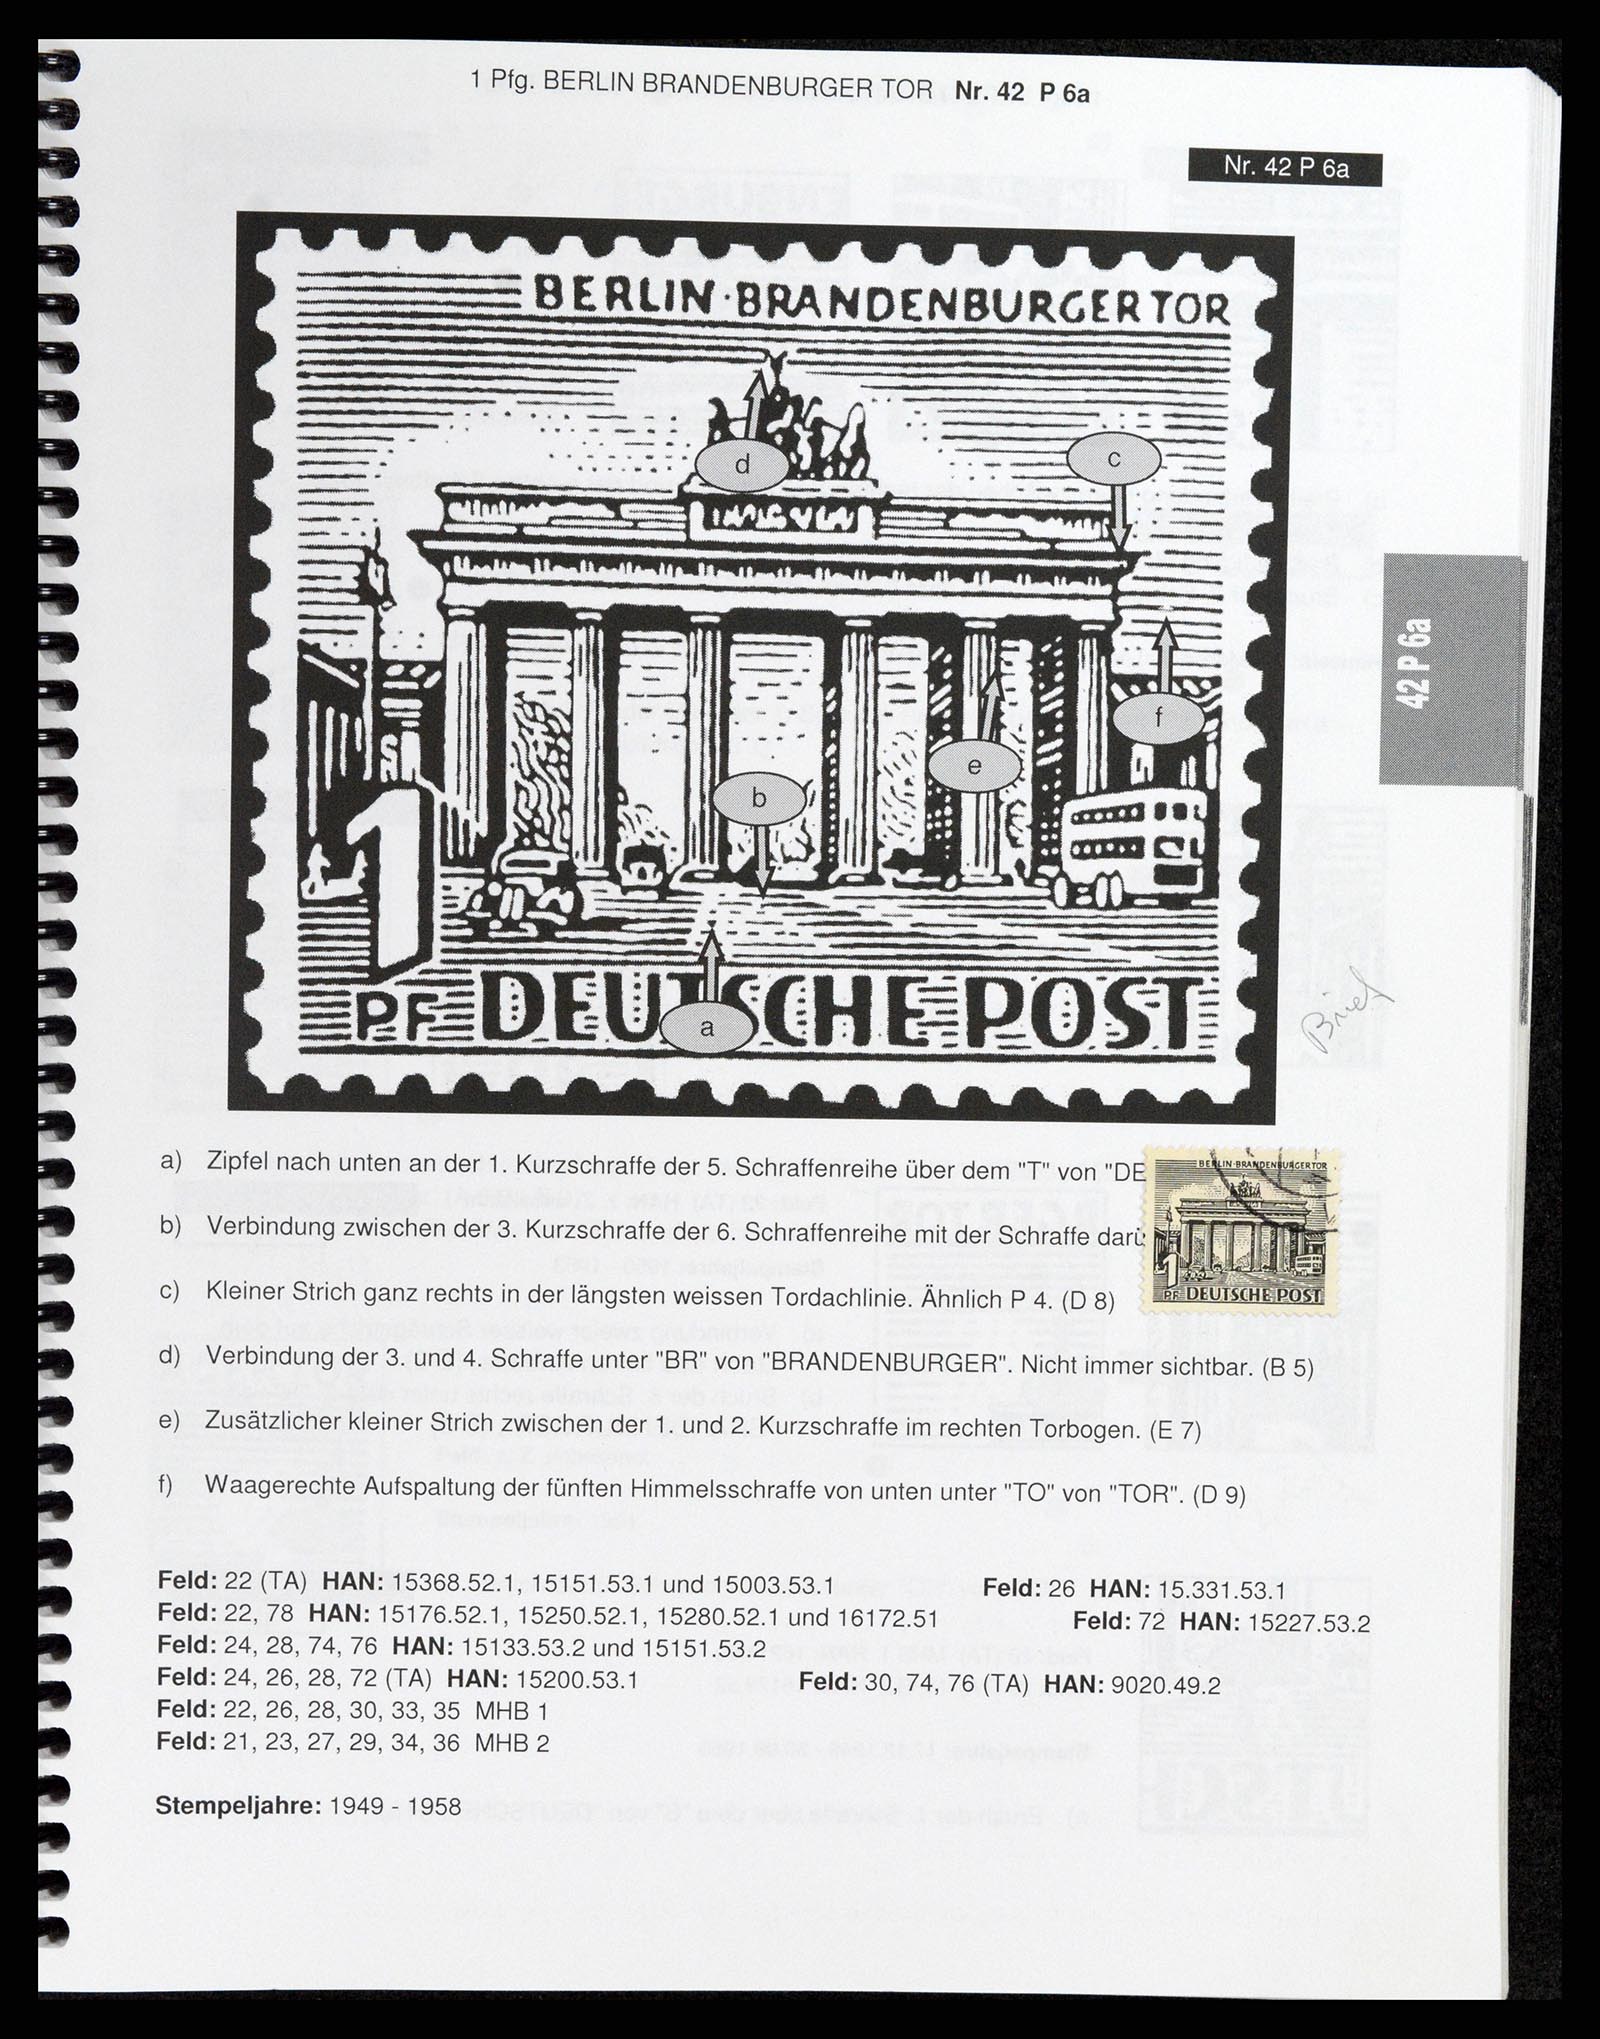 37458 044 - Stamp collection 37458 Berlin plateflaws 1949.